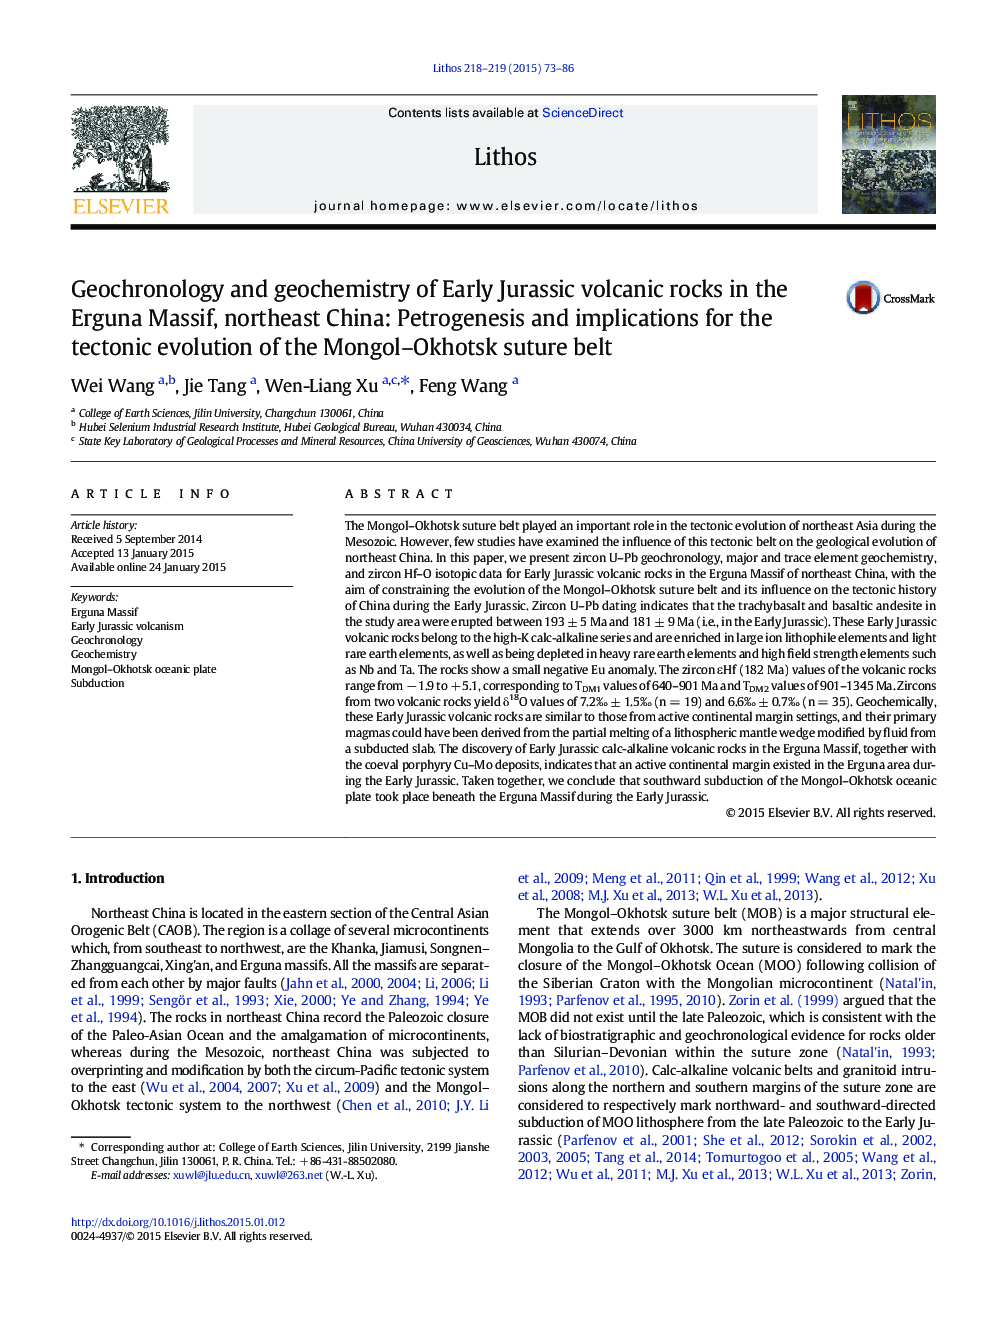 Geochronology and geochemistry of Early Jurassic volcanic rocks in the Erguna Massif, northeast China: Petrogenesis and implications for the tectonic evolution of the Mongol–Okhotsk suture belt